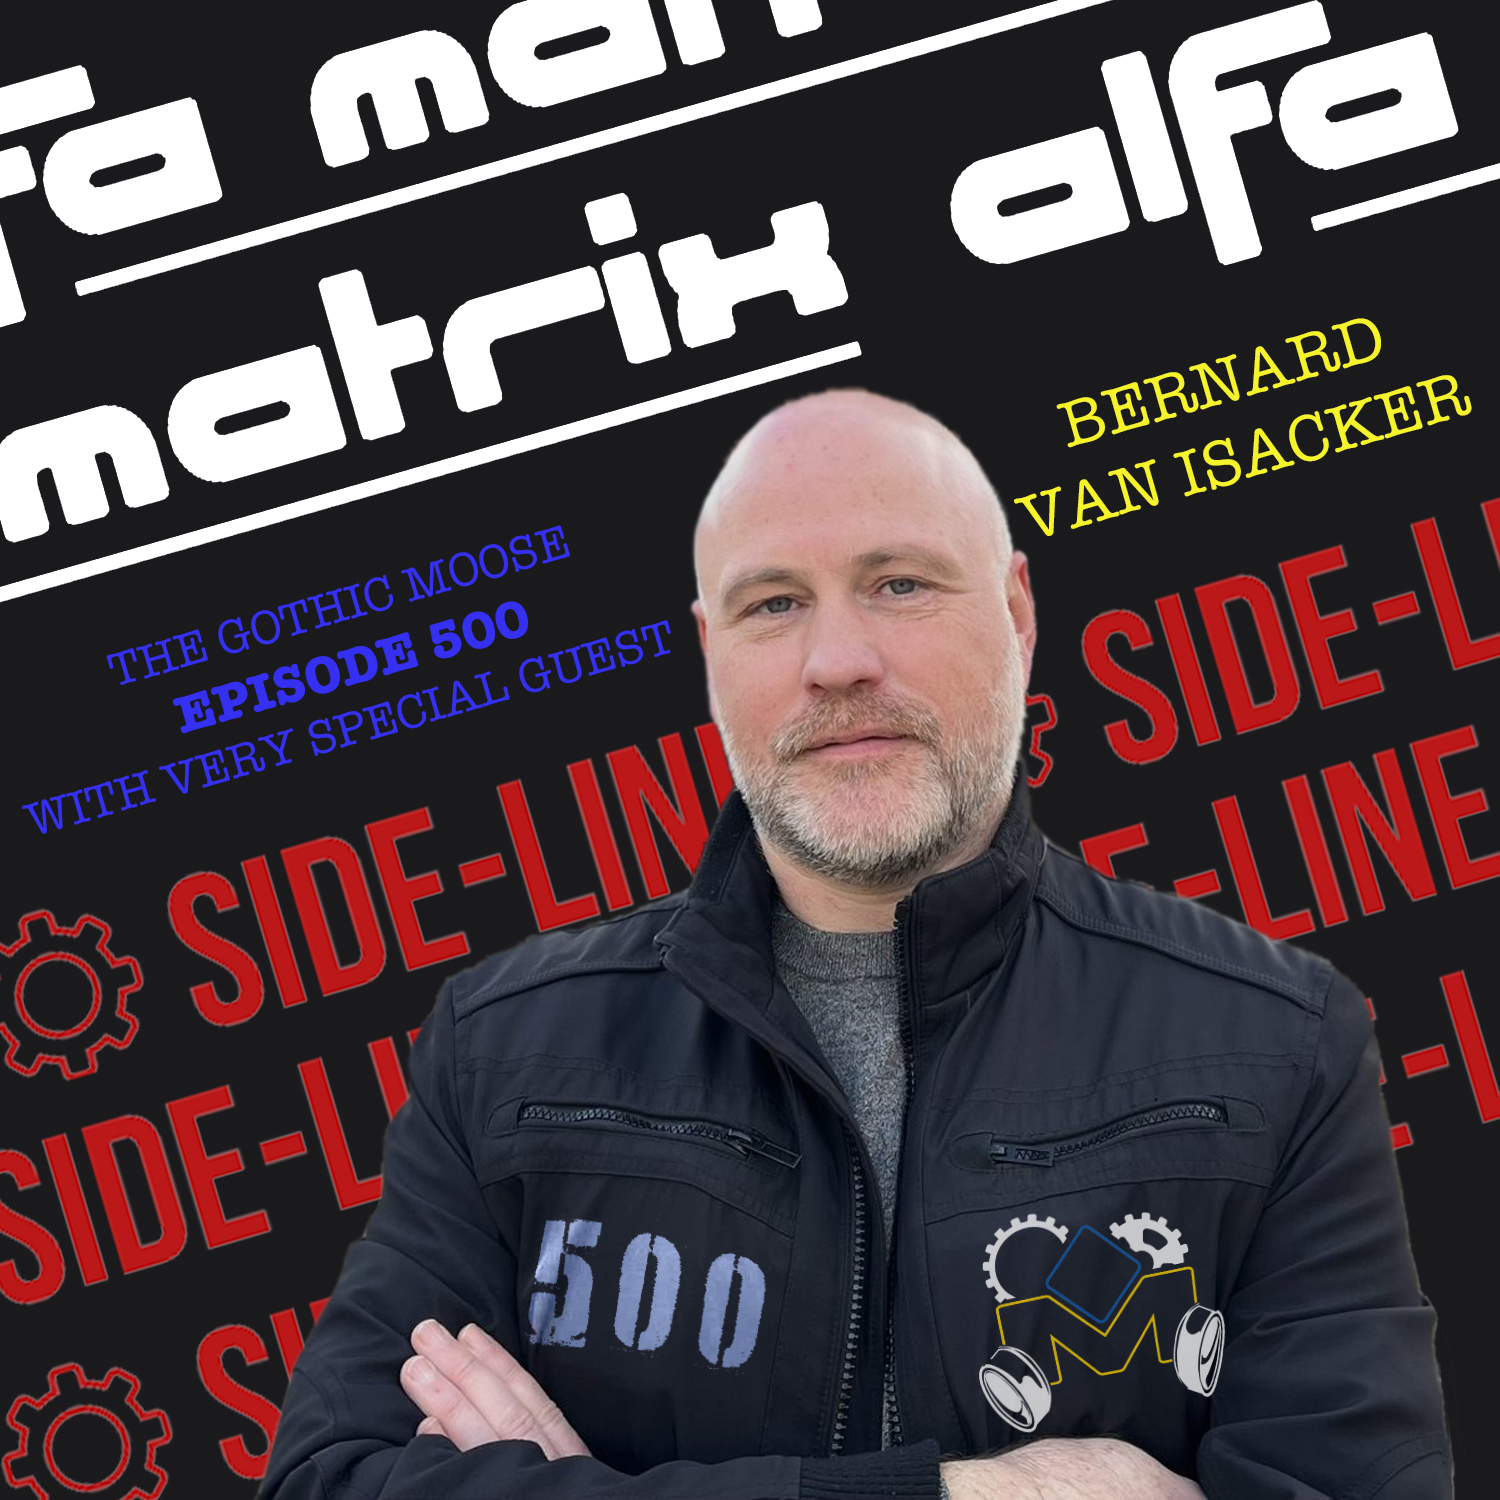 The Gothic Moose – Episode 500 – with Very Special Guest Bernard Van Isacker from Side-line.com and Alfa-Matrix